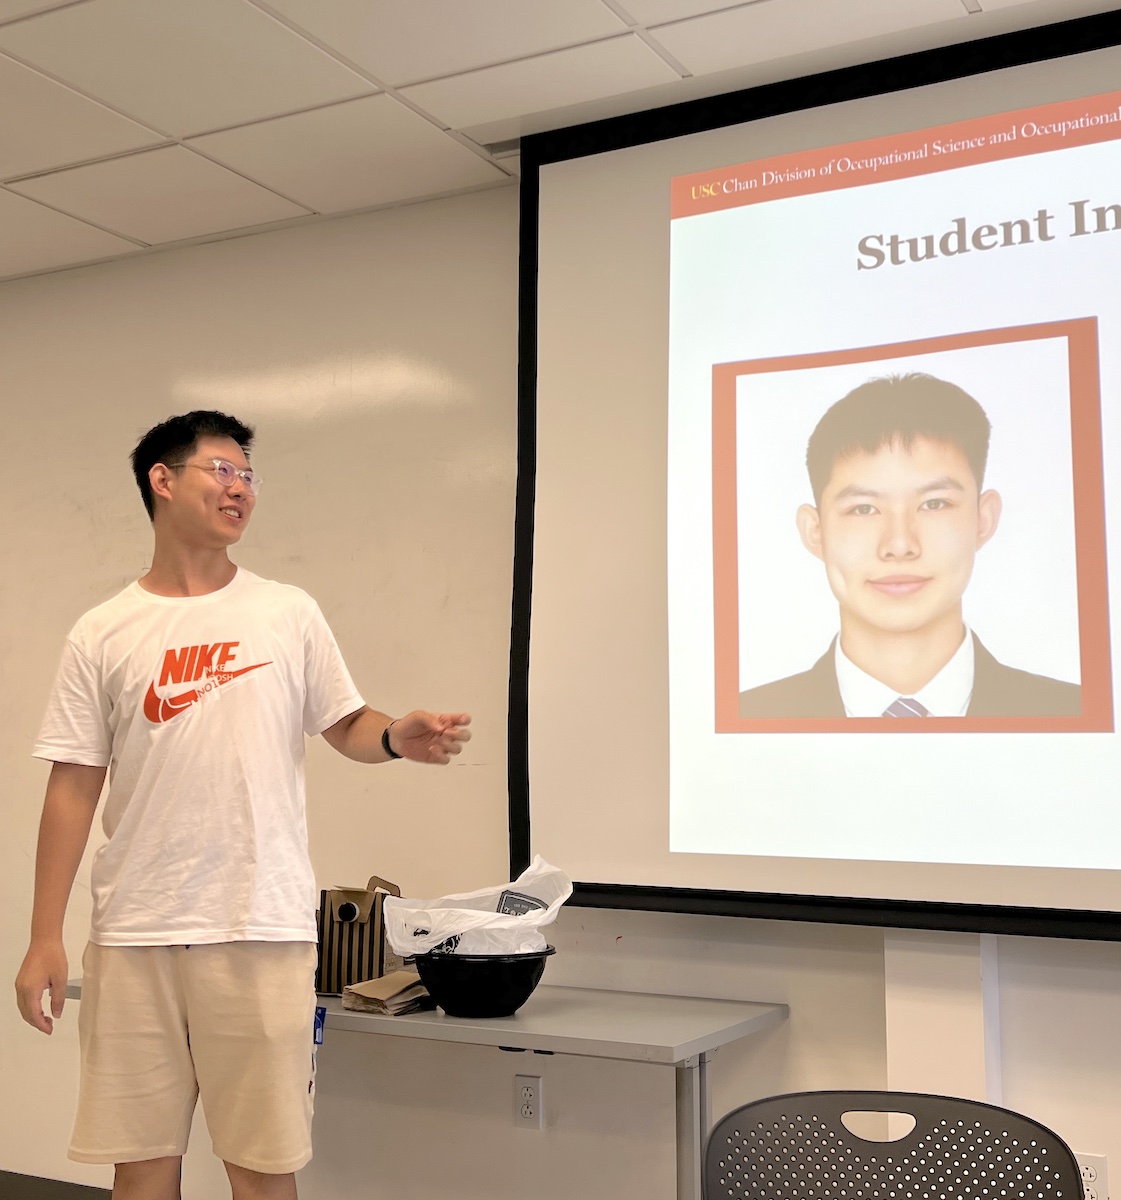 Cohort 3 student Yansong Li introduces himself to his peers and faculty